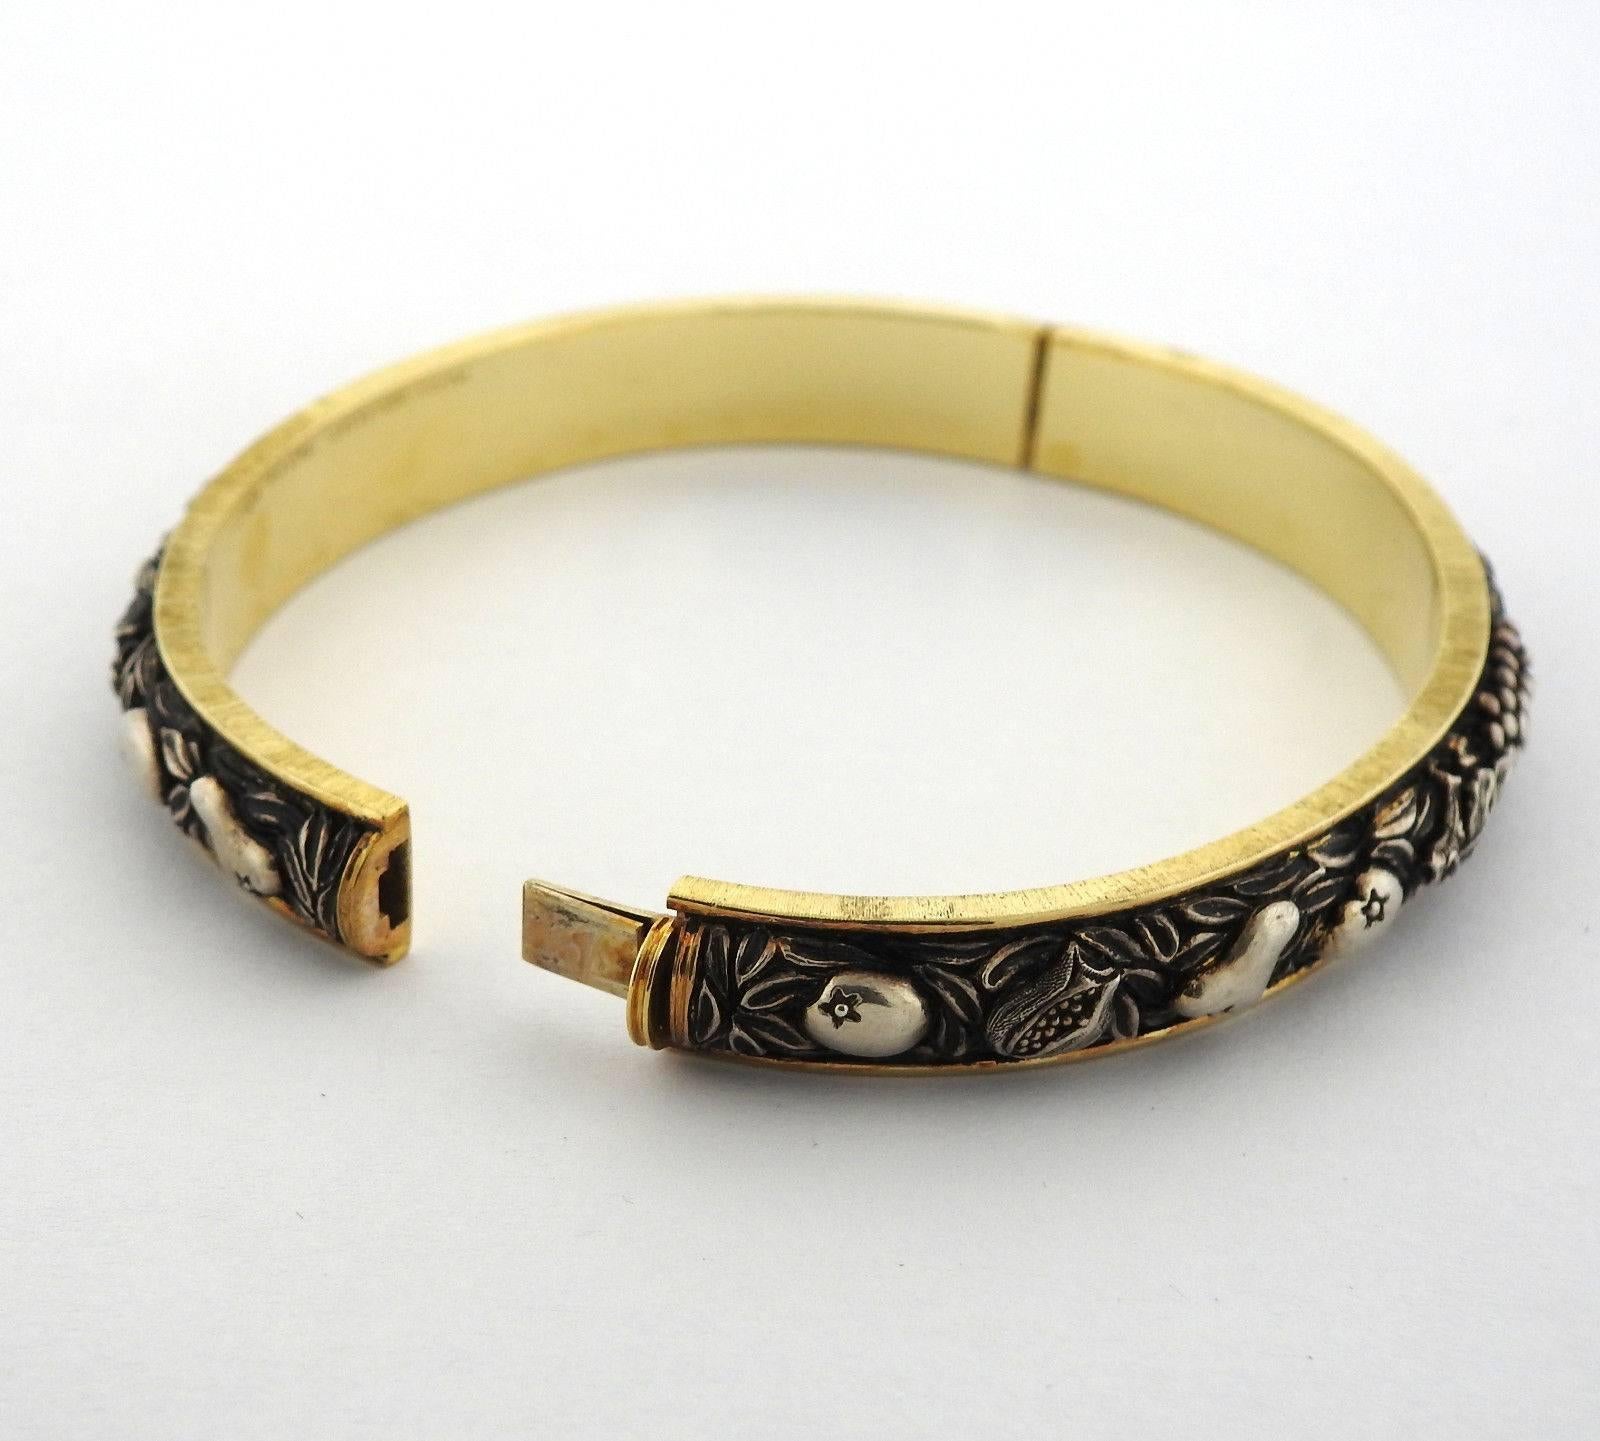 An 18k yellow gold and sterling silver bracelet by Buccellati. Bracelet will comfortably fit up to 7